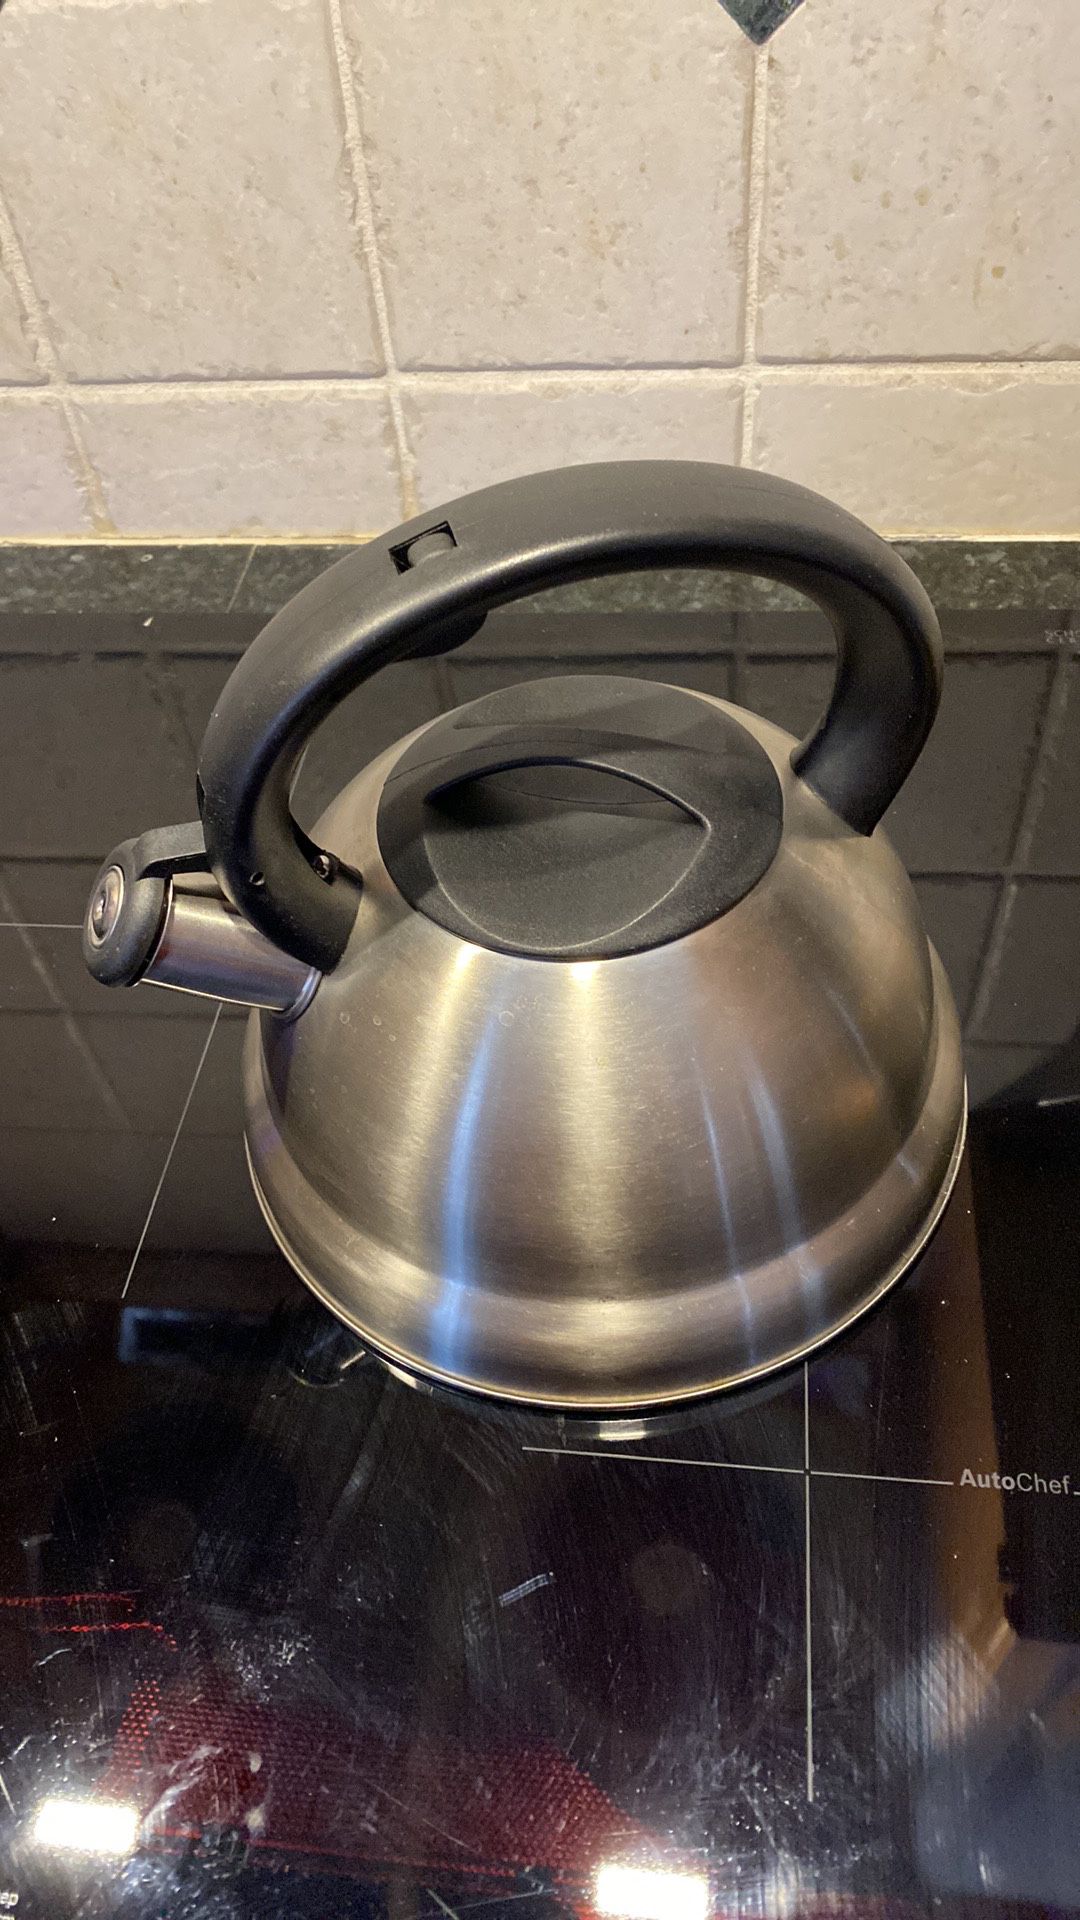 Whistle Kettle Stainless Steel